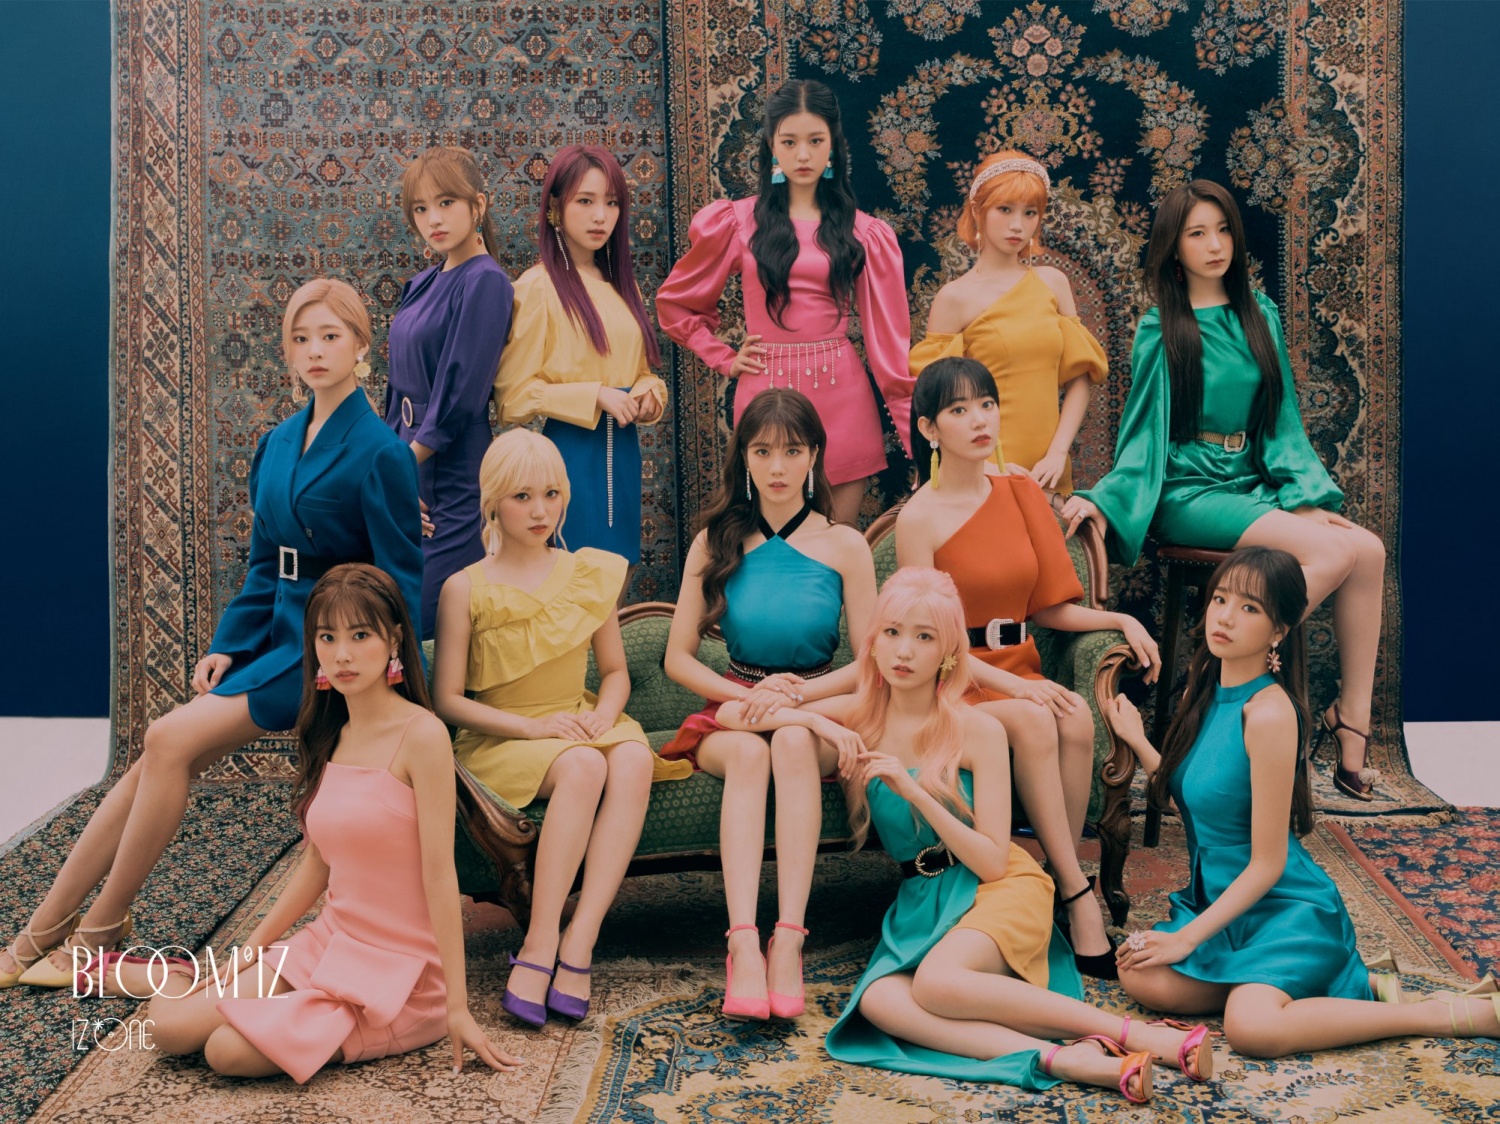 Comeback IZ*ONE ranked No. 1 in Japan Tower Records Reservation Chart